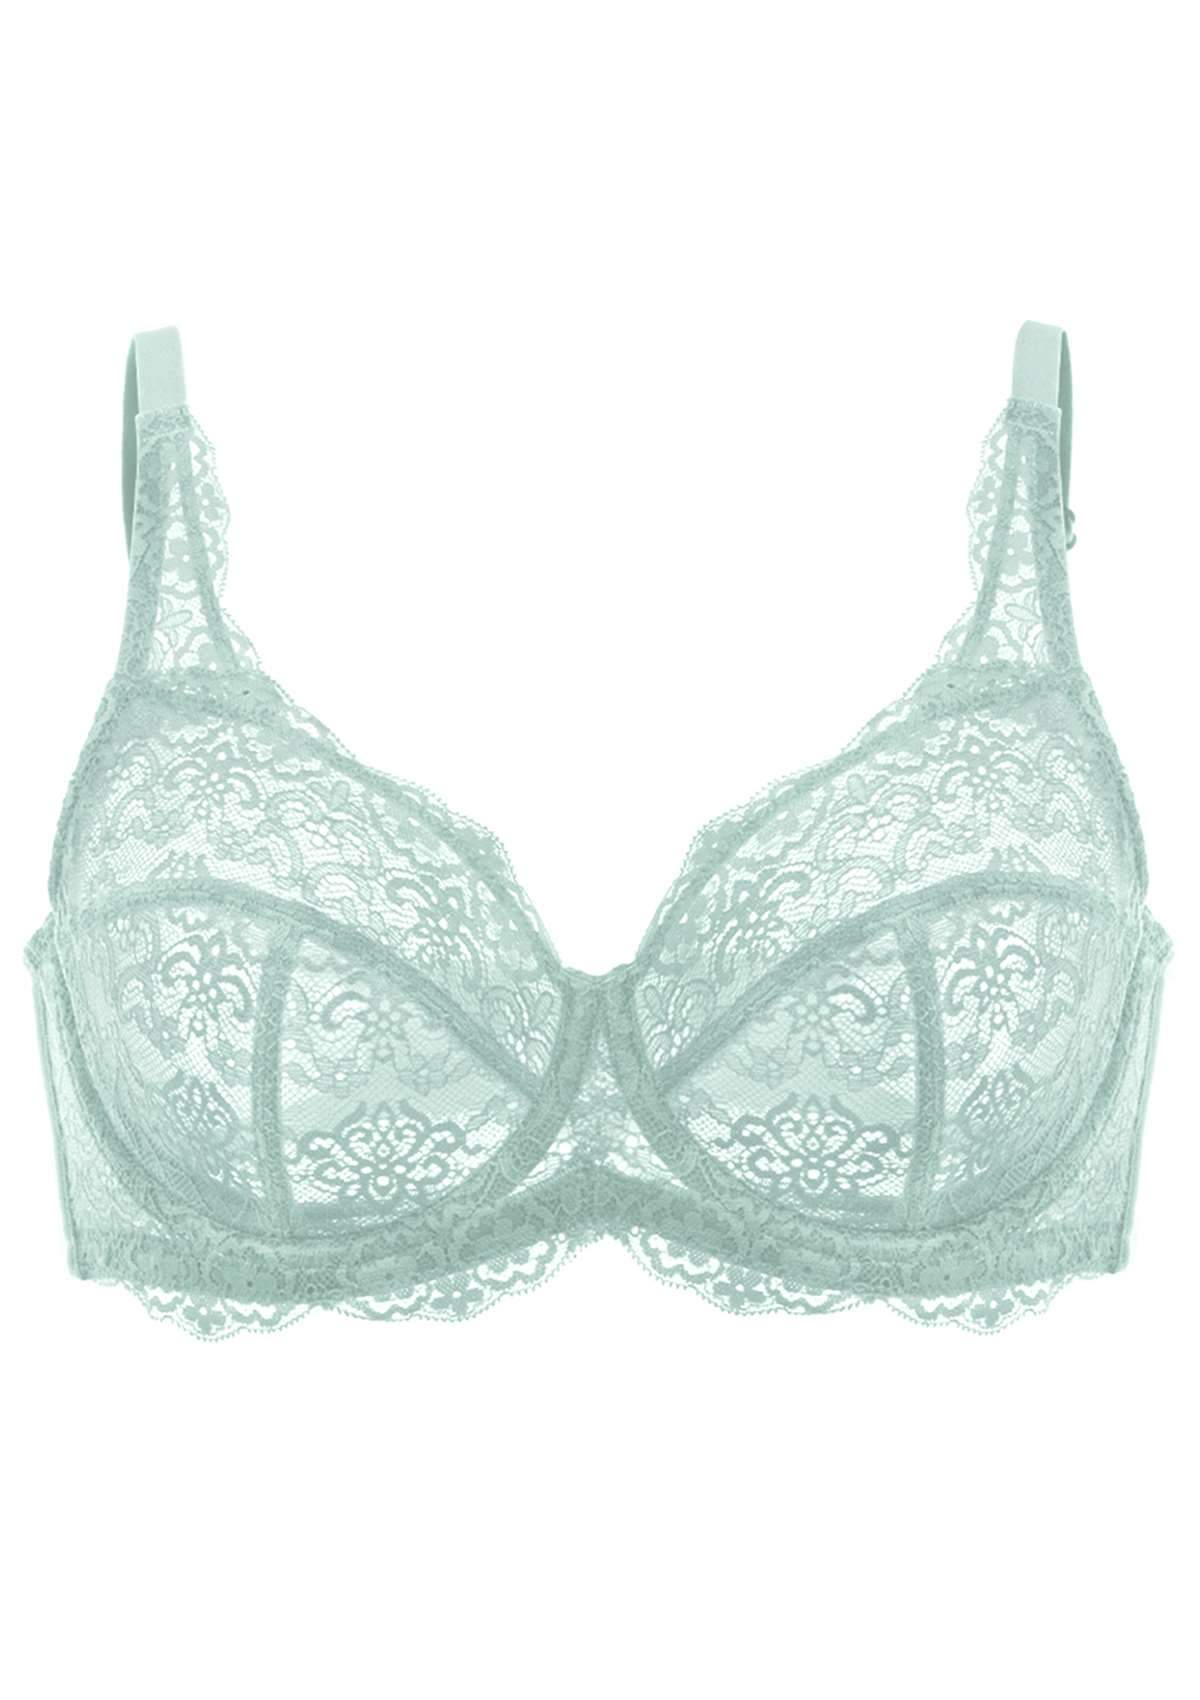 HSIA All-Over Floral Lace: Best Bra For Elderly With Sagging Breasts - Crystal Blue / 44 / C